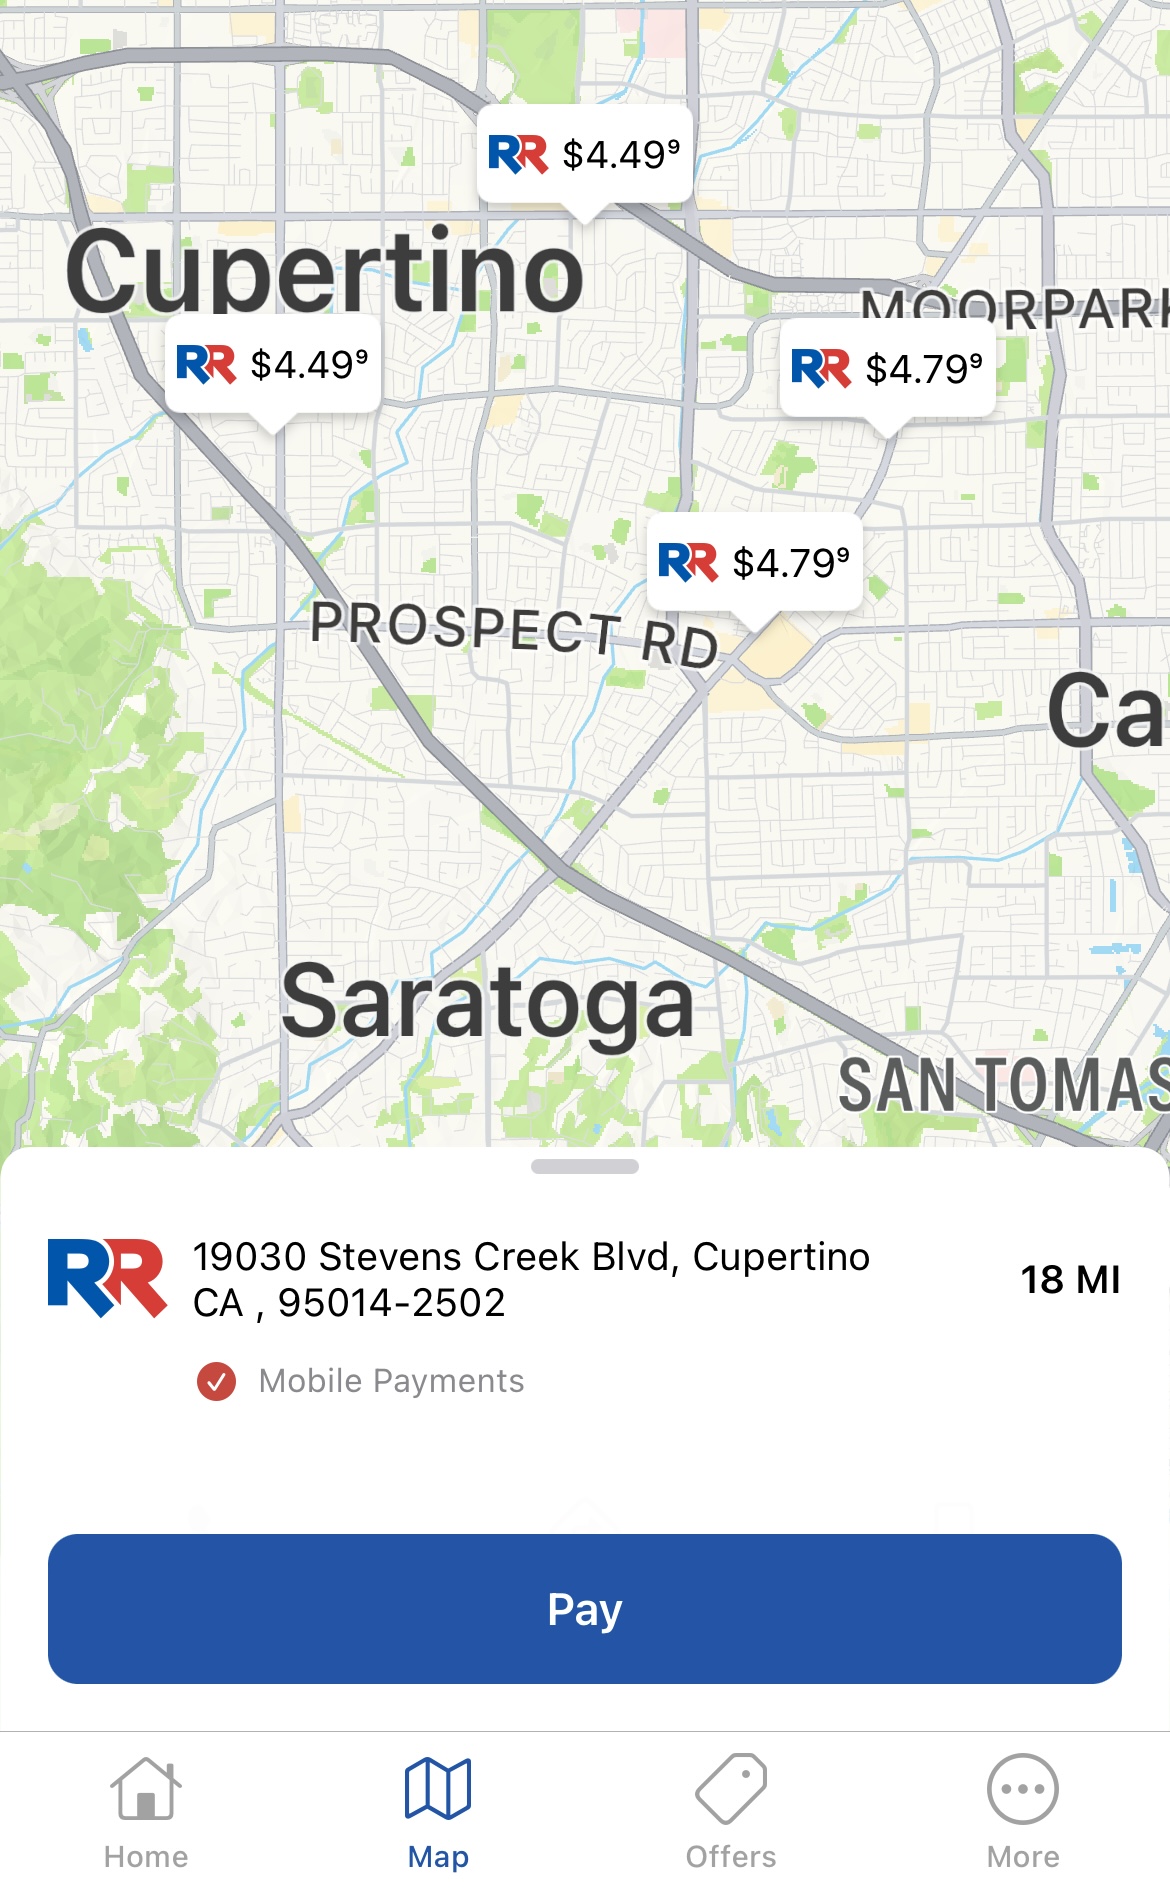 Image from the RR app of a map with three pins with unleaded fuel prices.